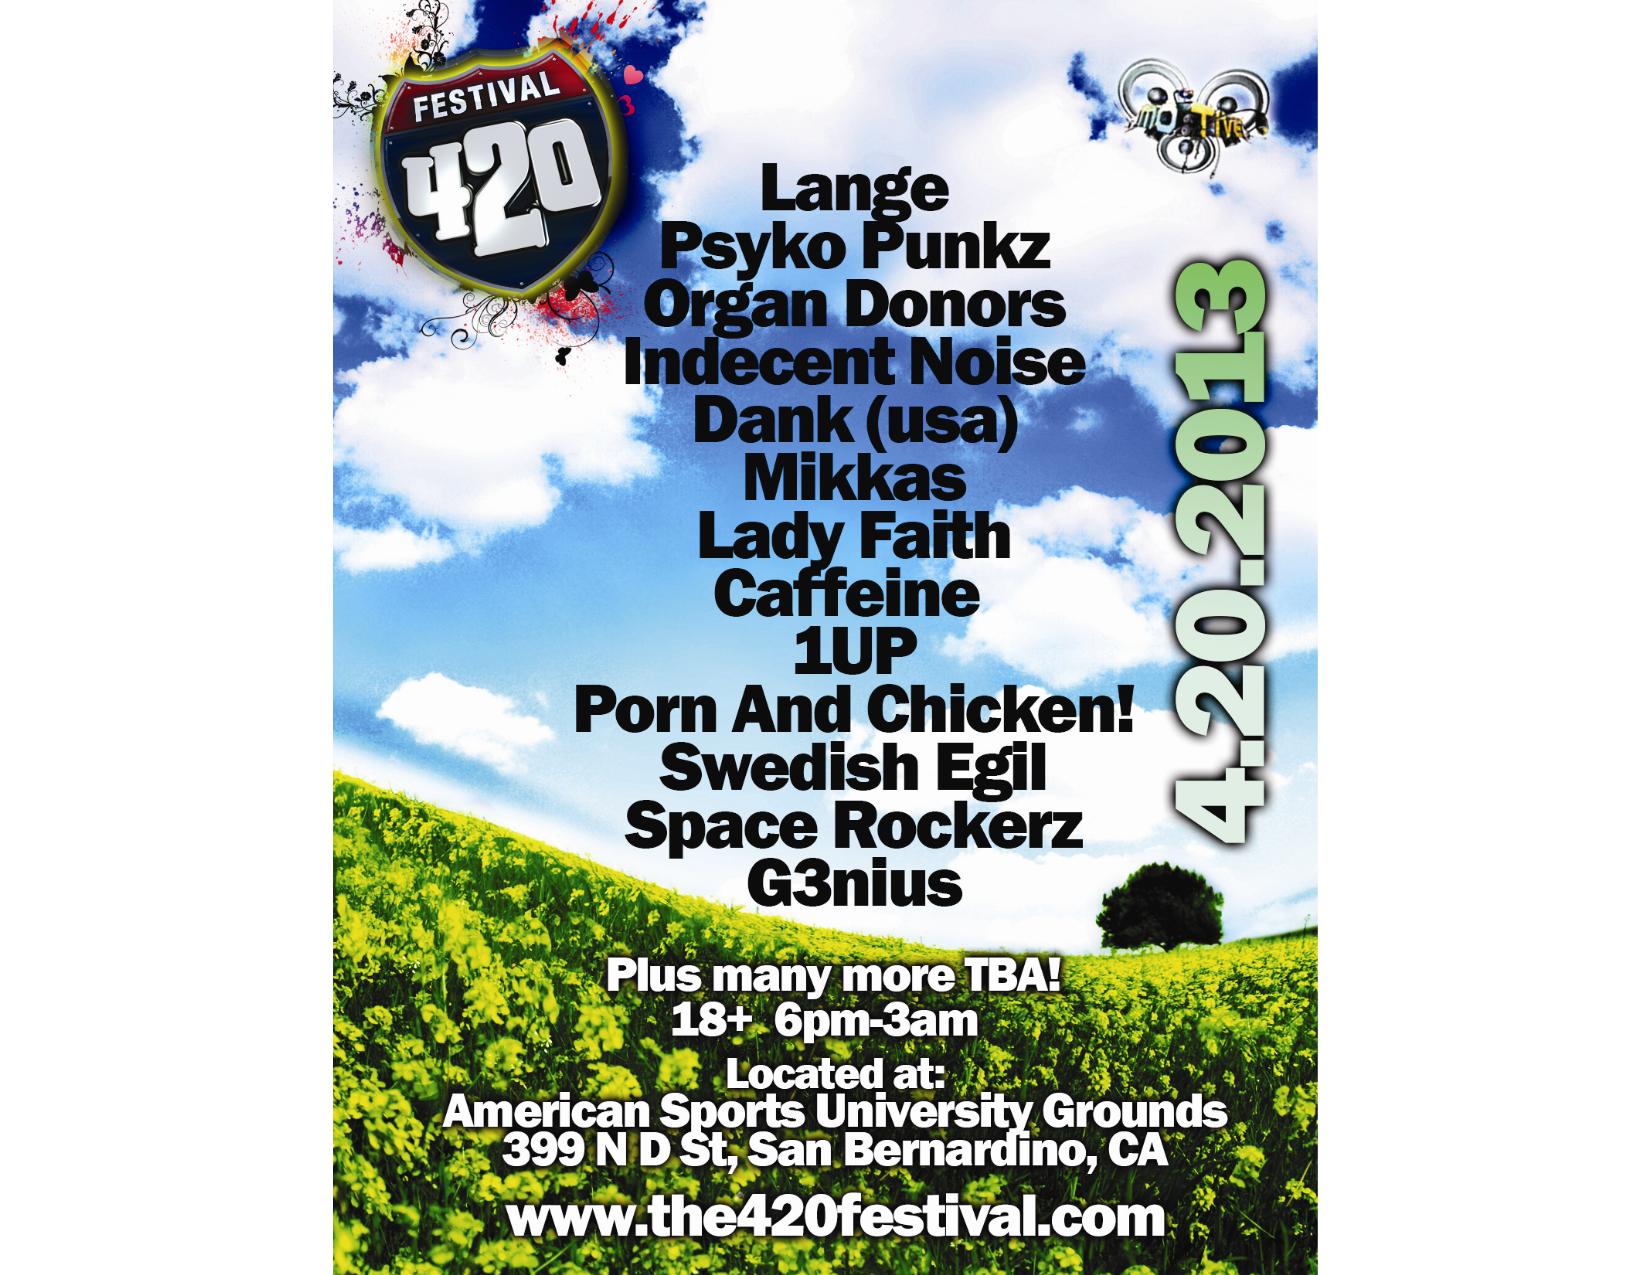 Buy Tickets to The 420 Festival in Los Angeles